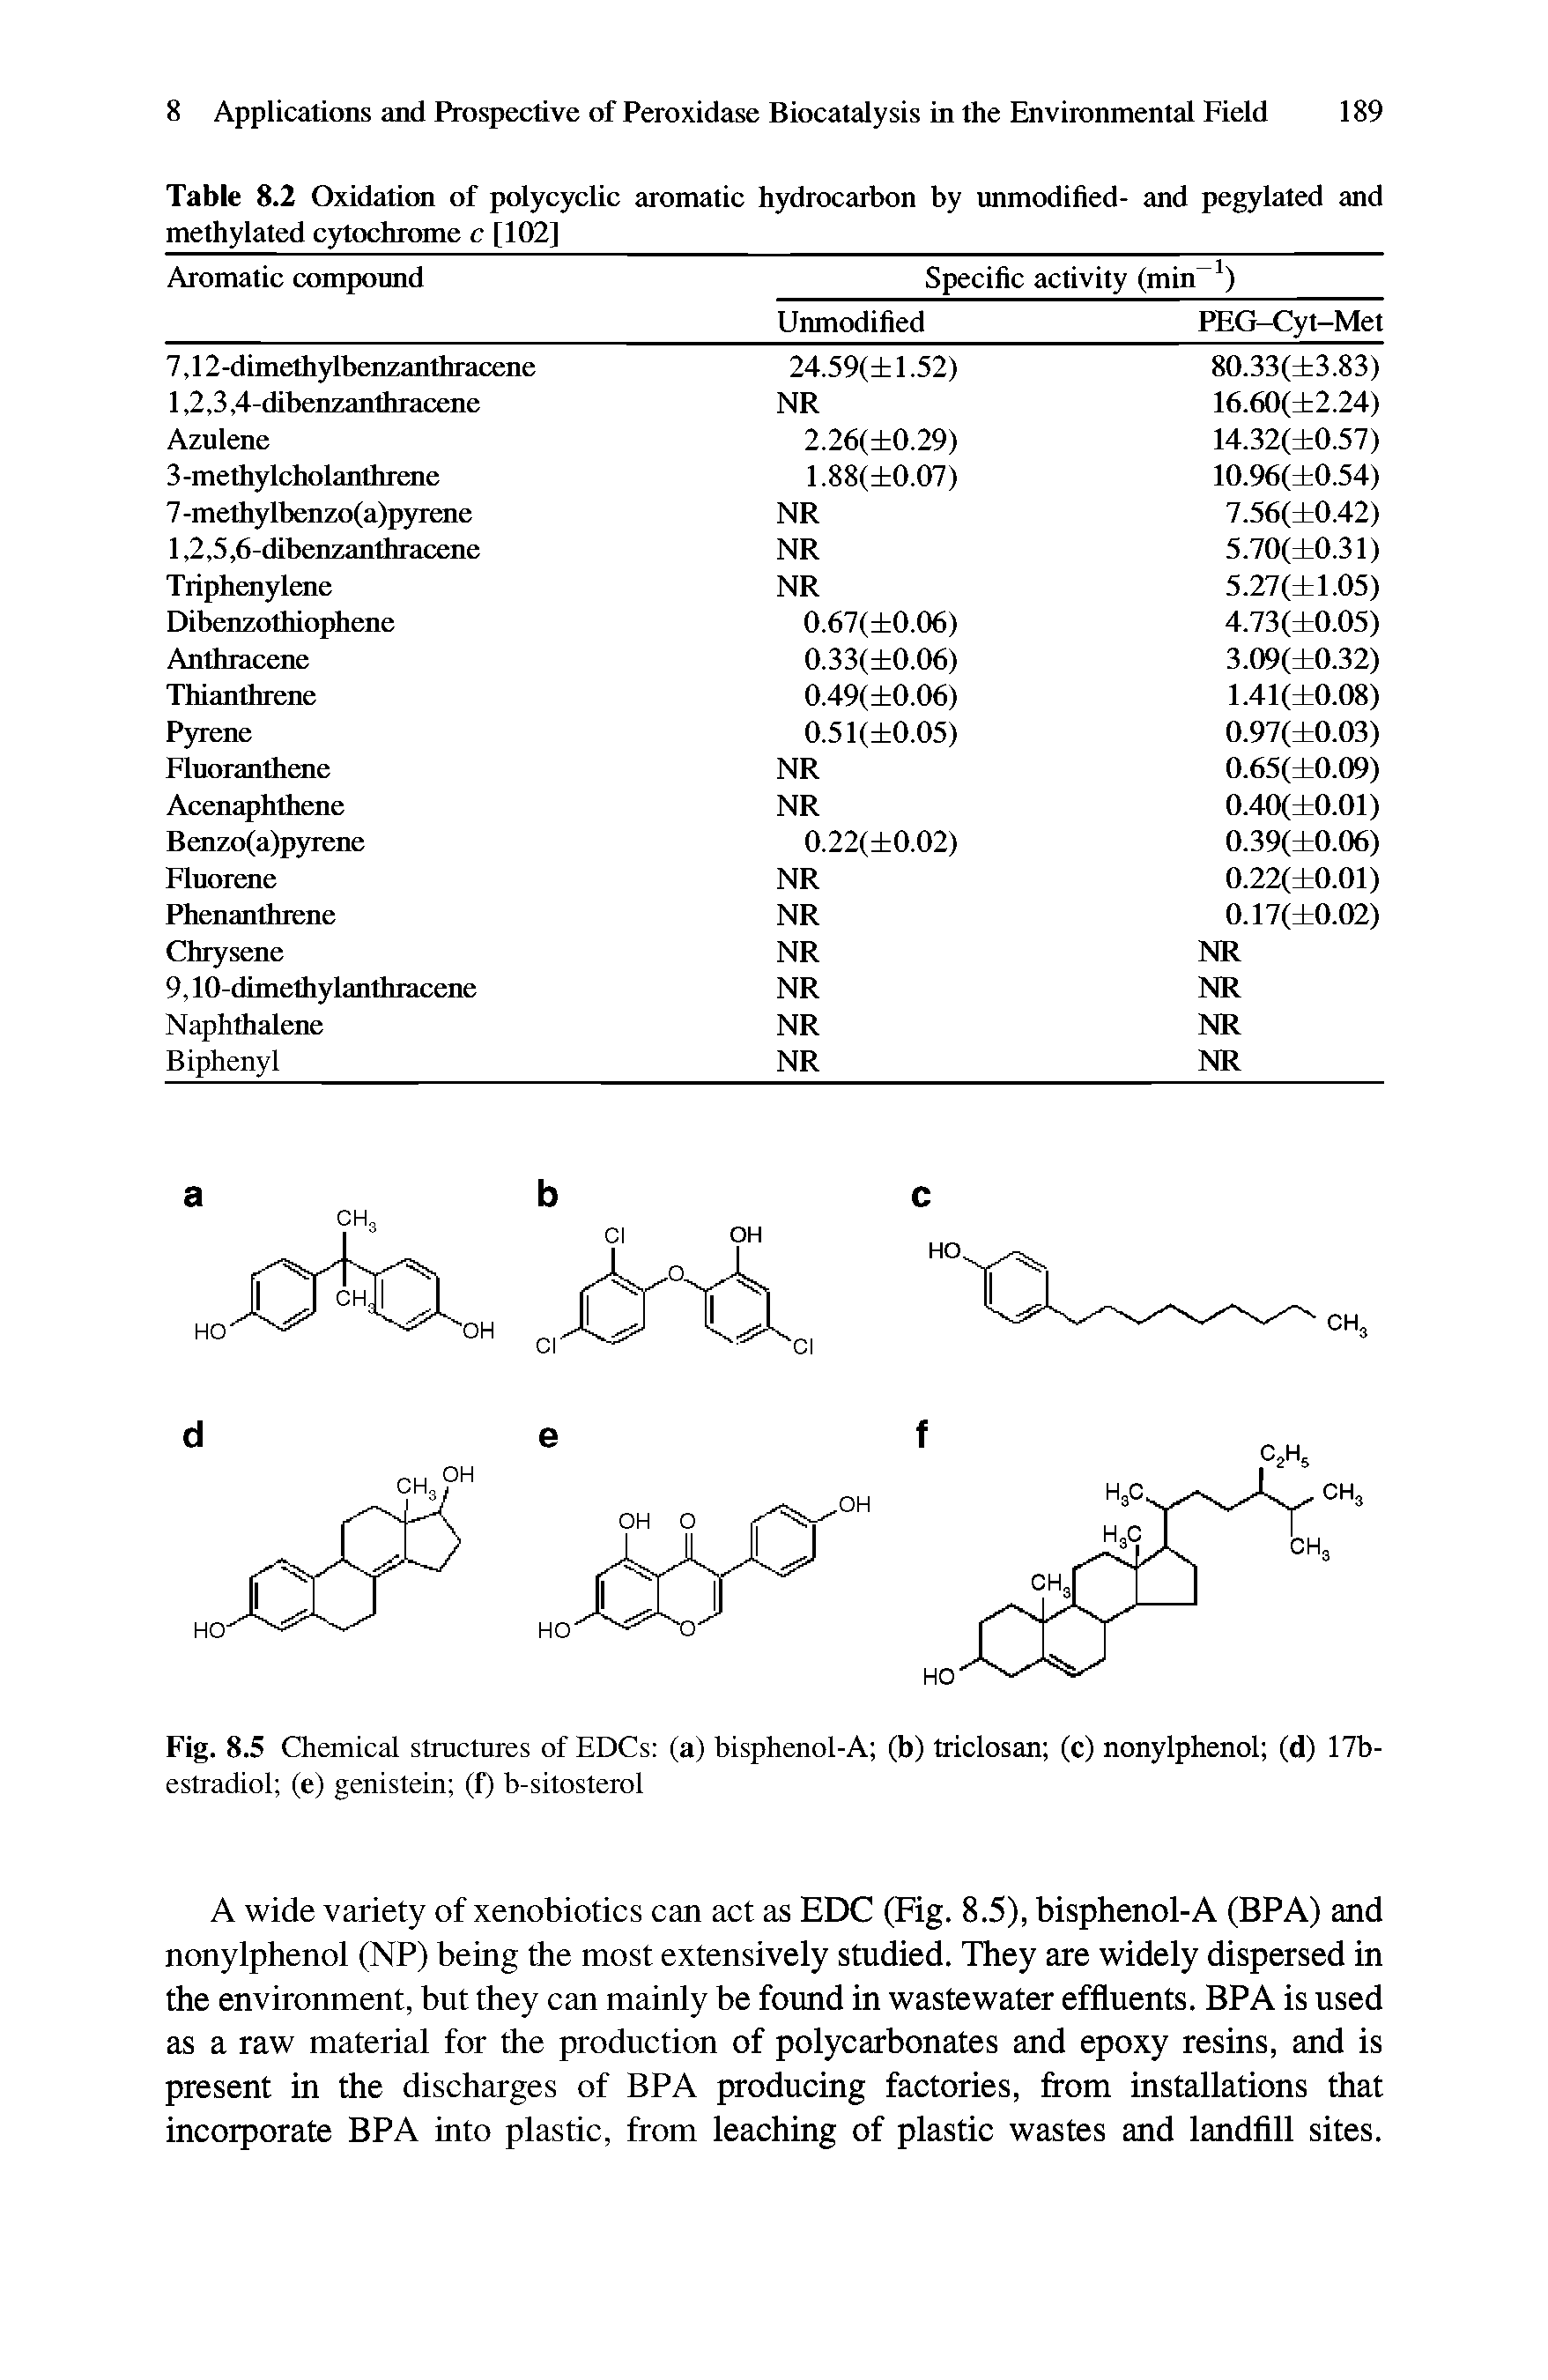 Table 8.2 Oxidation of polycyclic aromatic hydrocarbon by unmodified- and pegylated and methylated cytochrome c [102]...